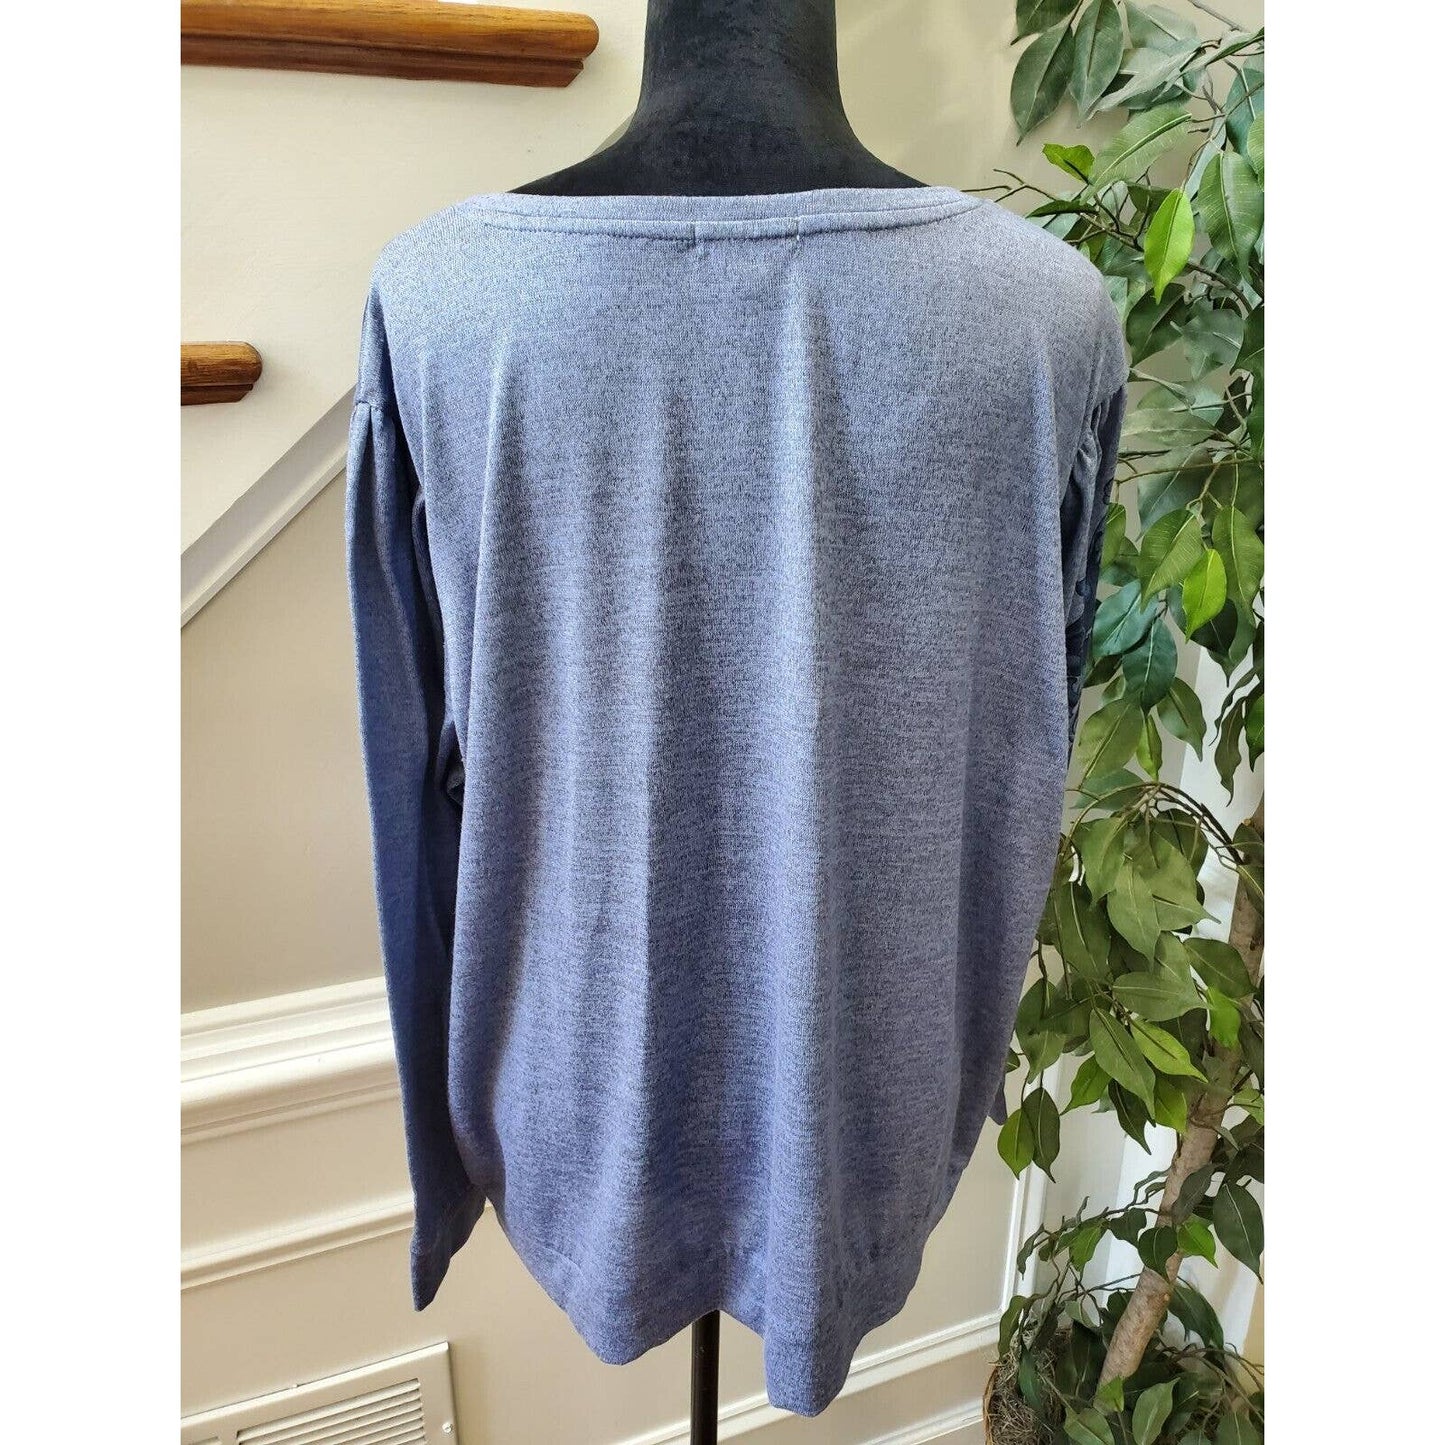 One World Women's Blue Polyester Round Neck Long Sleeve Top Shirt Size X-Large